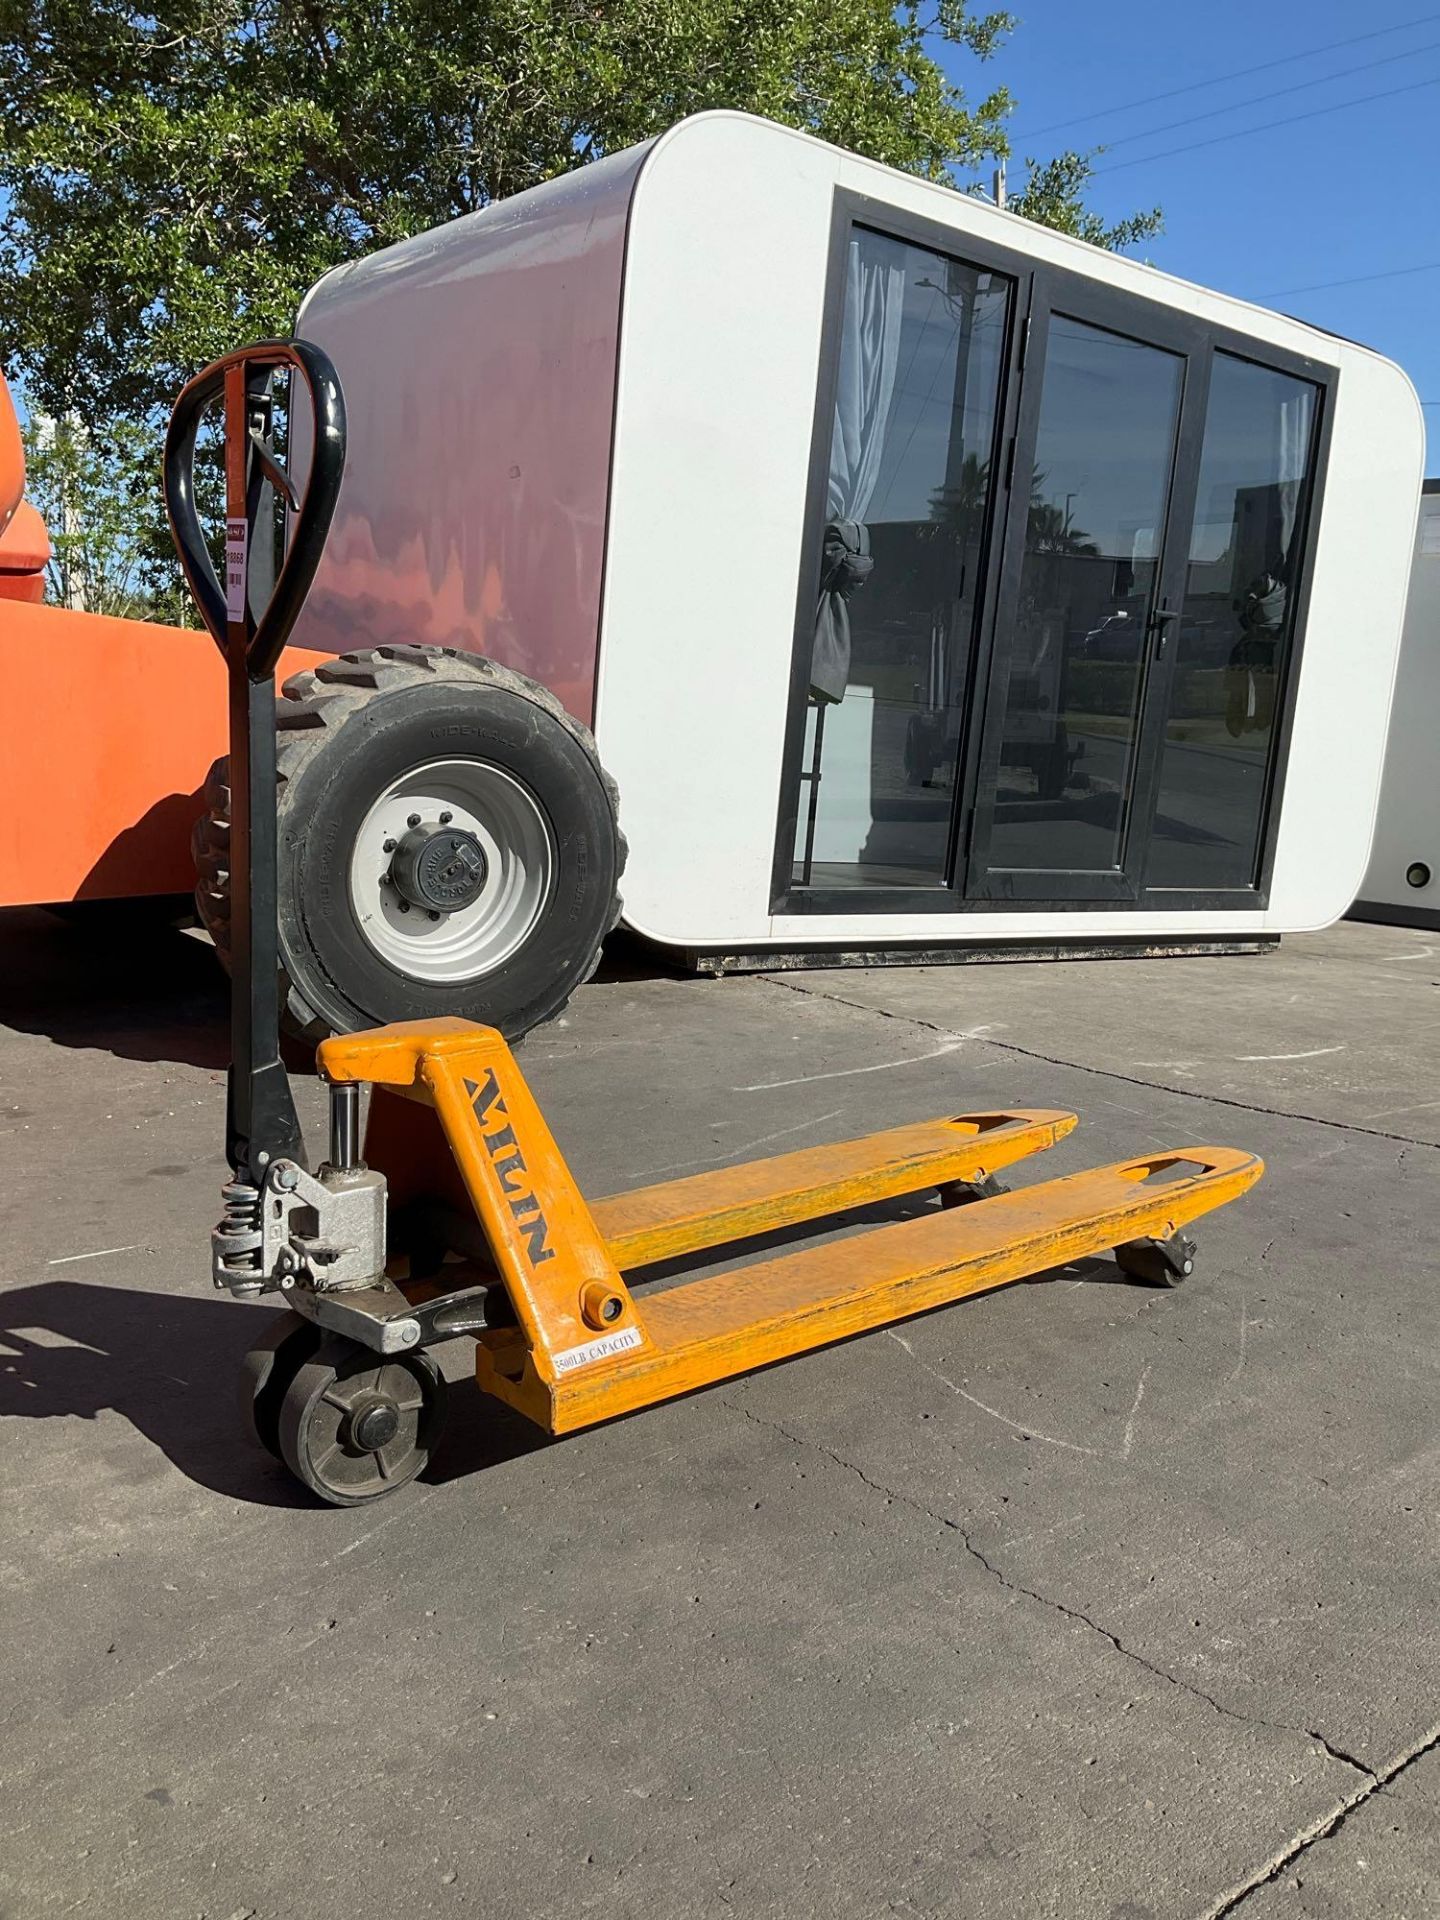 XILIN HYDRAULIC PALLET JACK MODEL XET55, APPROX MAX CAPACITY 5500LBS - Image 10 of 10